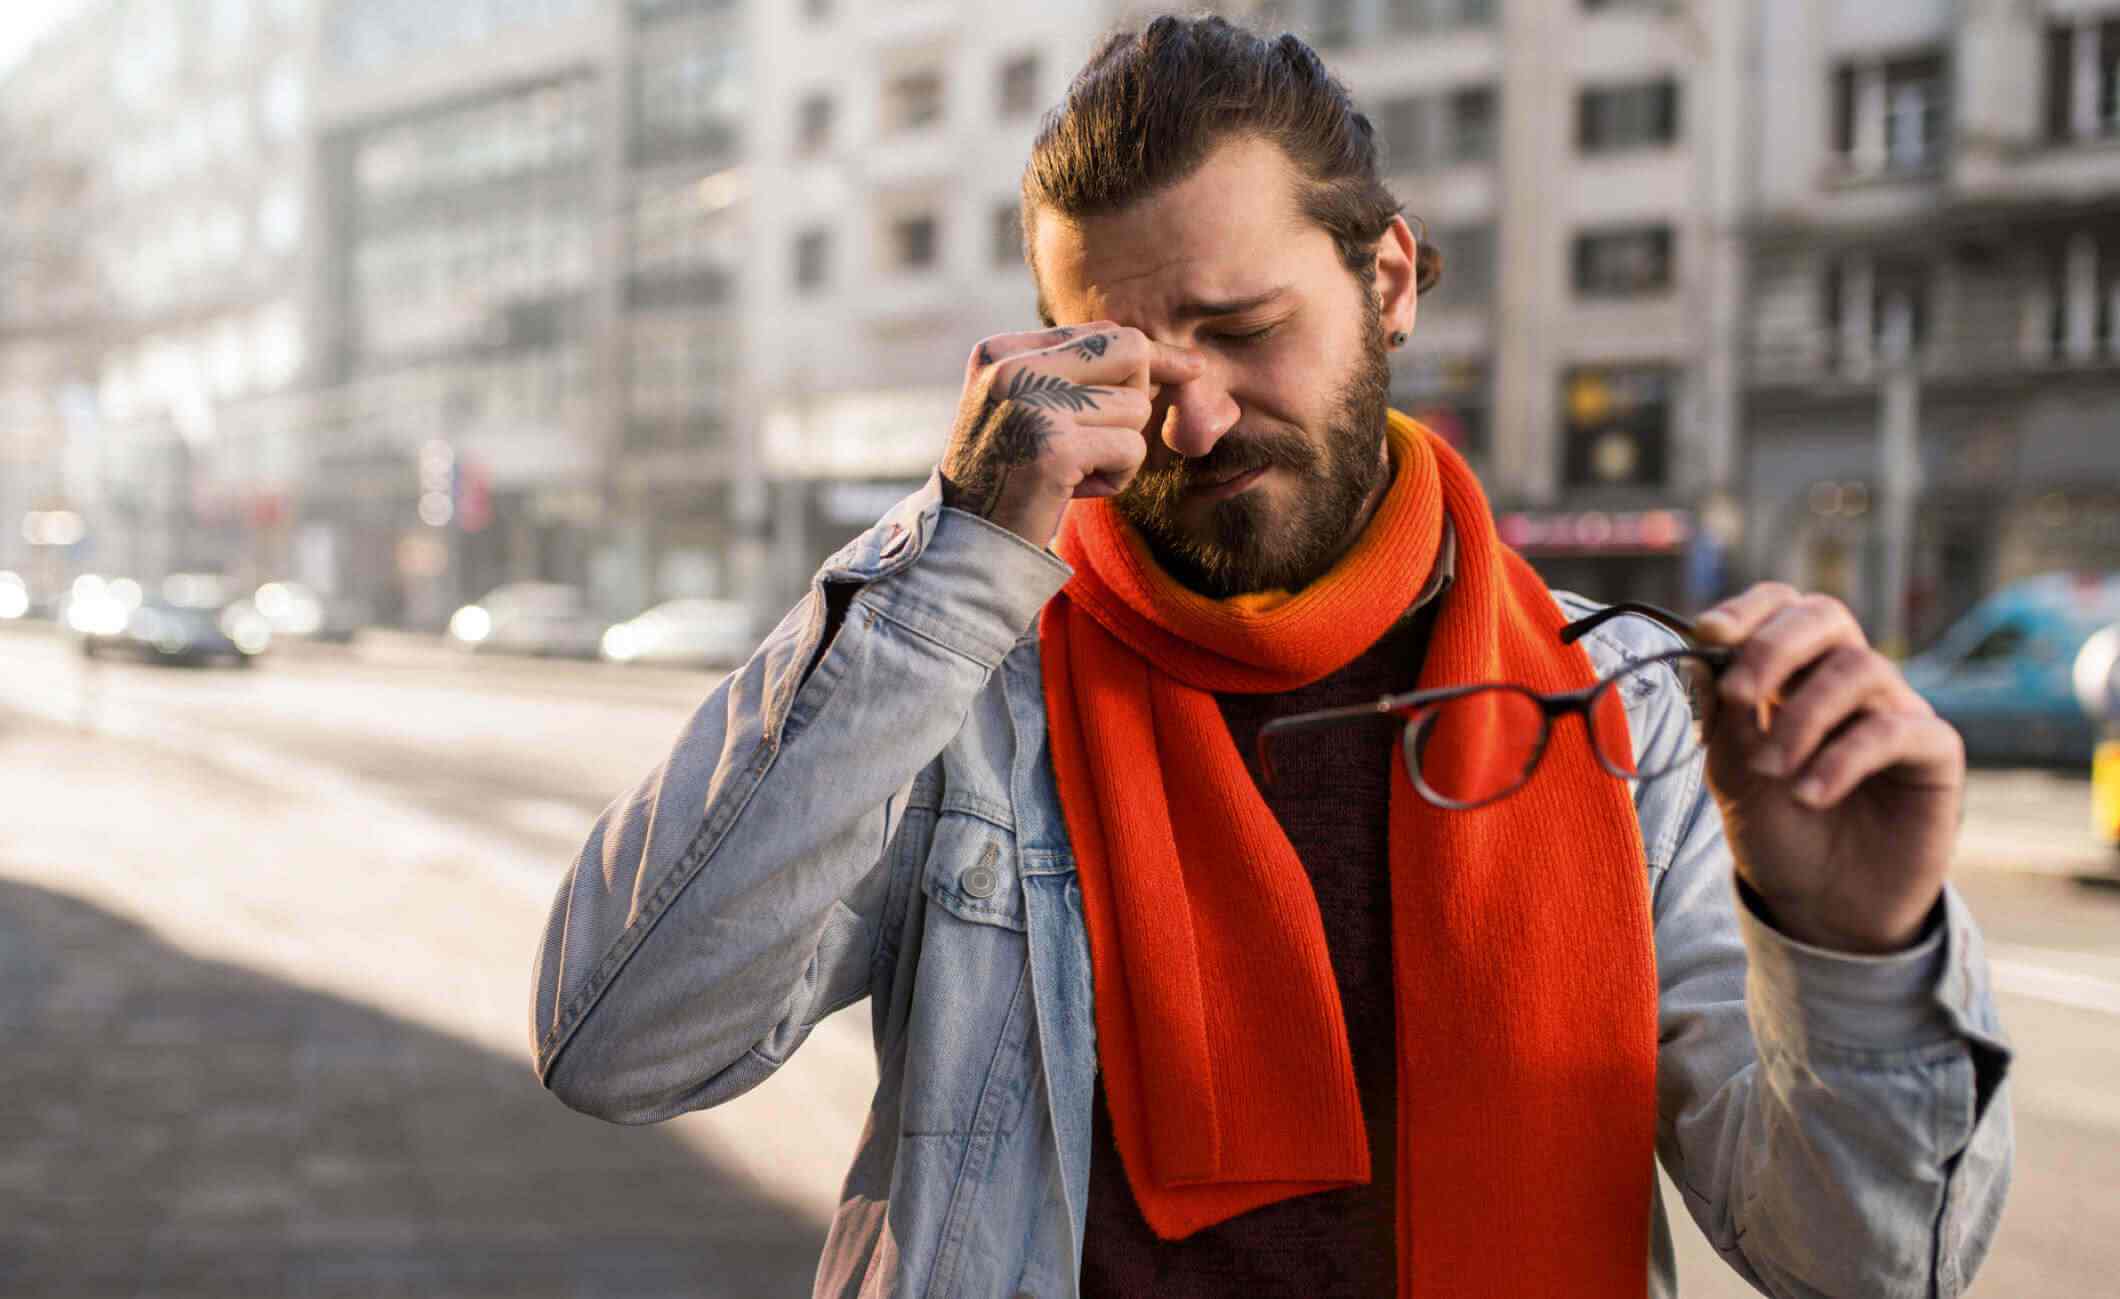 Man pinching nose holding glasses in red scarf, header image for Hindsight blog